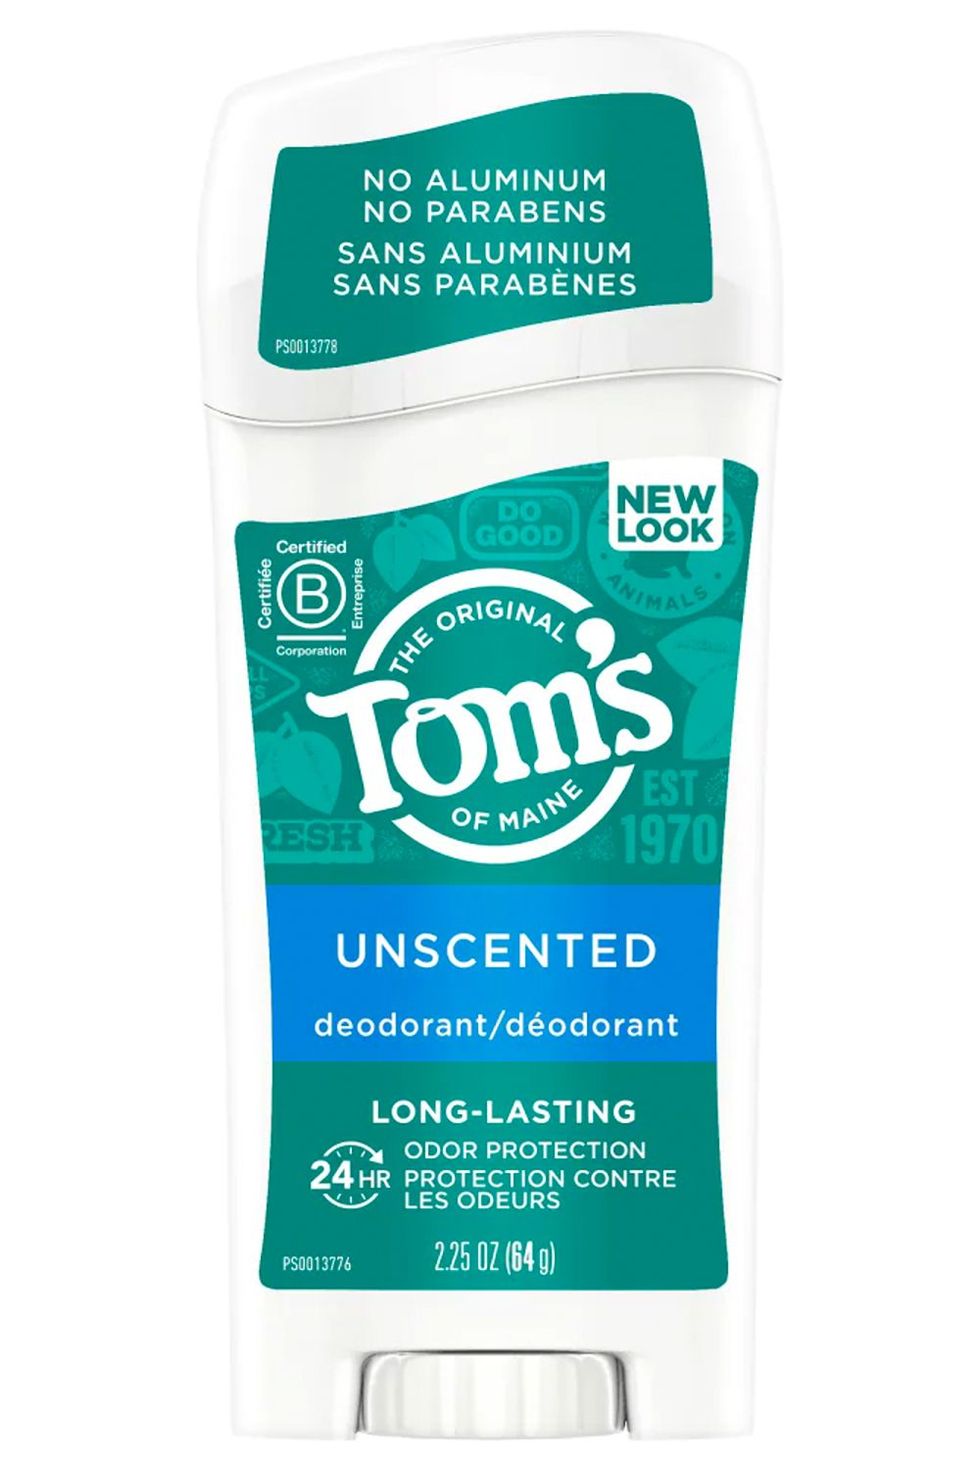 Tom's of Maine Long-Lasting Unscented Deodorant